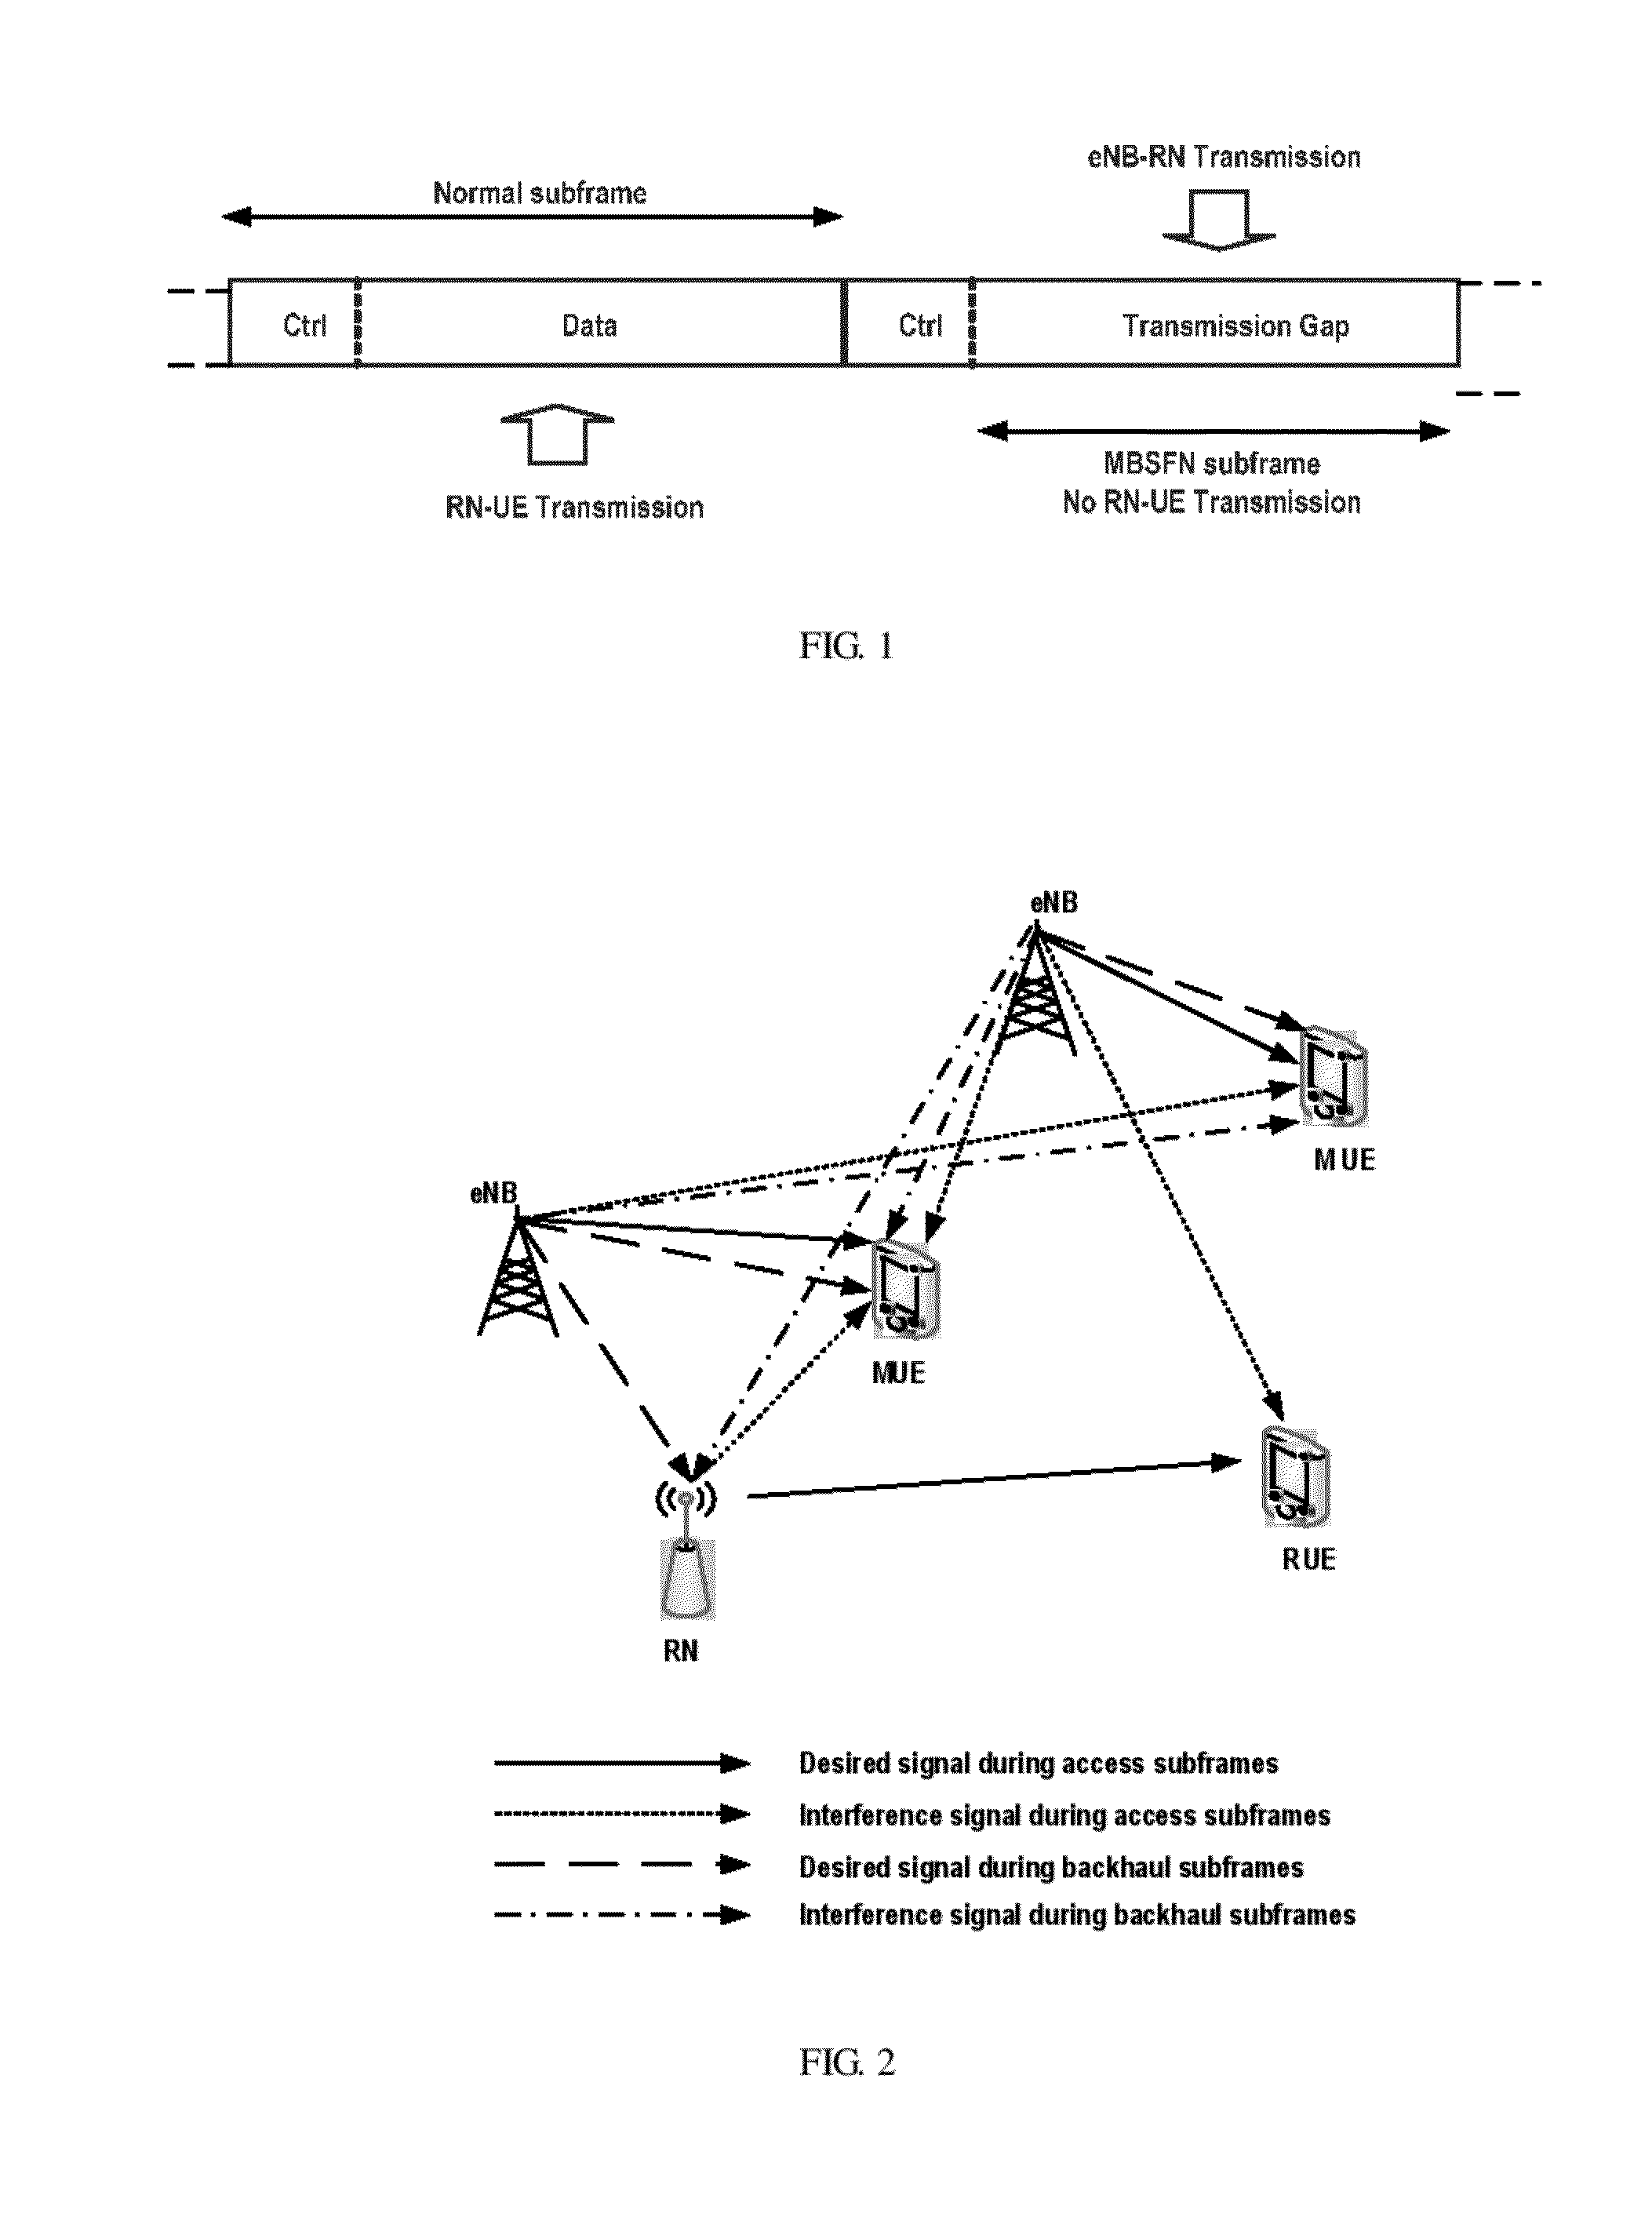 Method and apparatus for indicating downlink channel measurement and method and apparatus performing downlink channel measurement in a relaying system